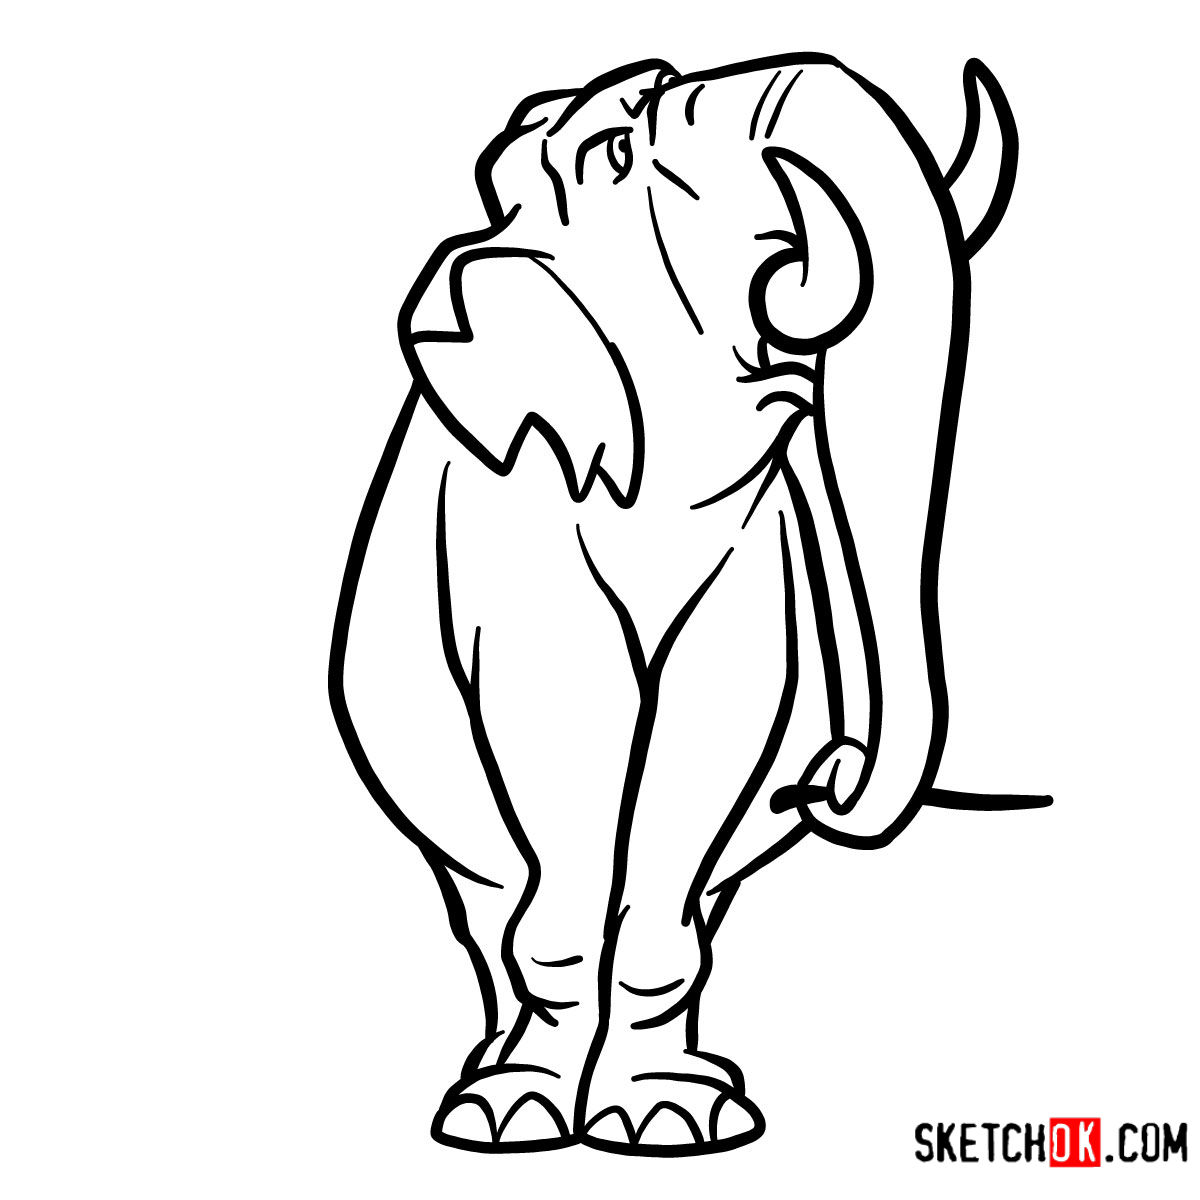 How to draw Colonel Hathi from the Jungle Book - step 09